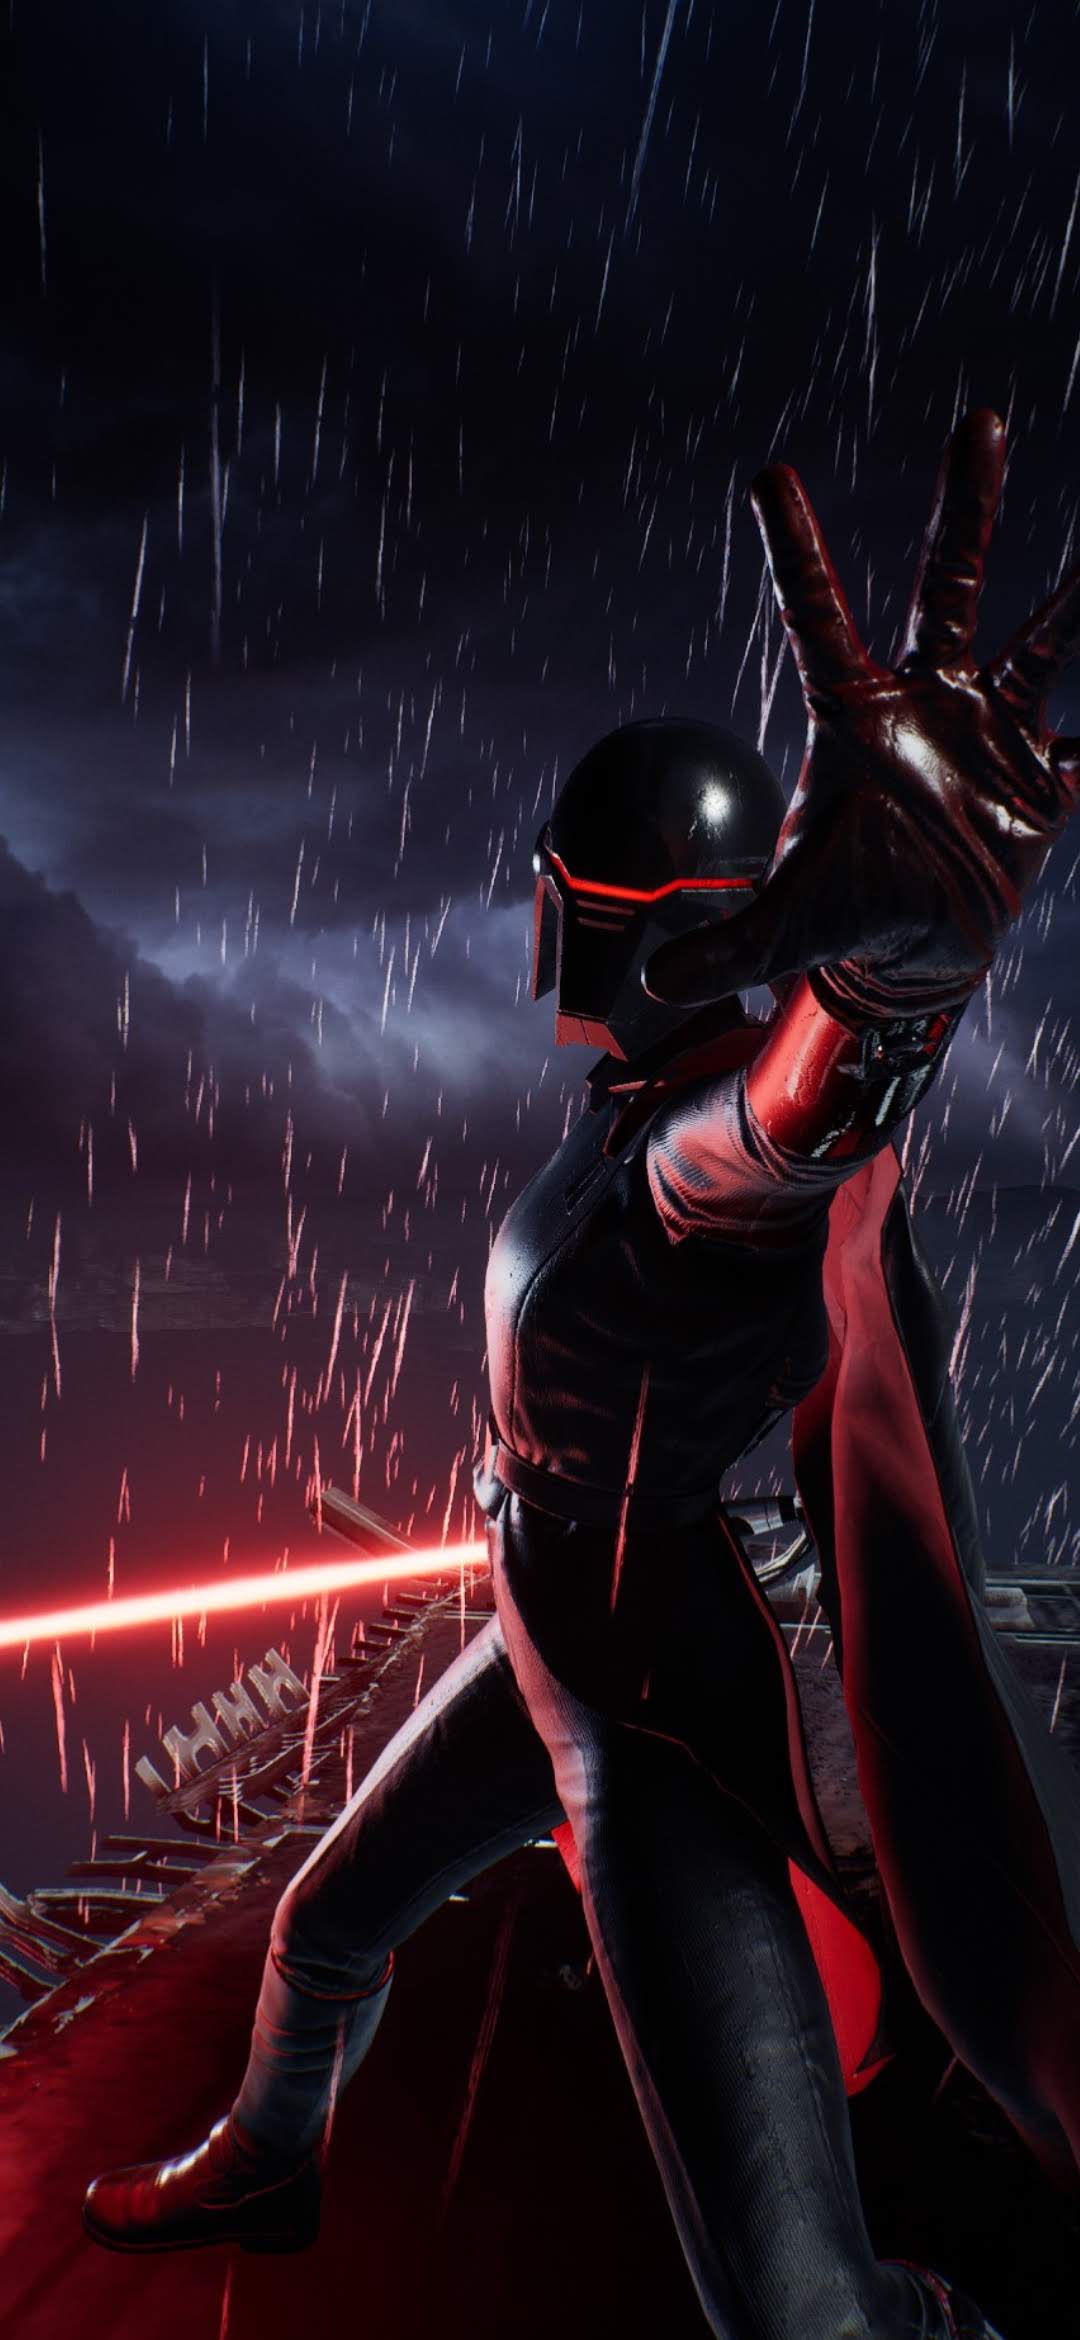 Star Wars Second Sister Inquisitor Wallpaper For Tech